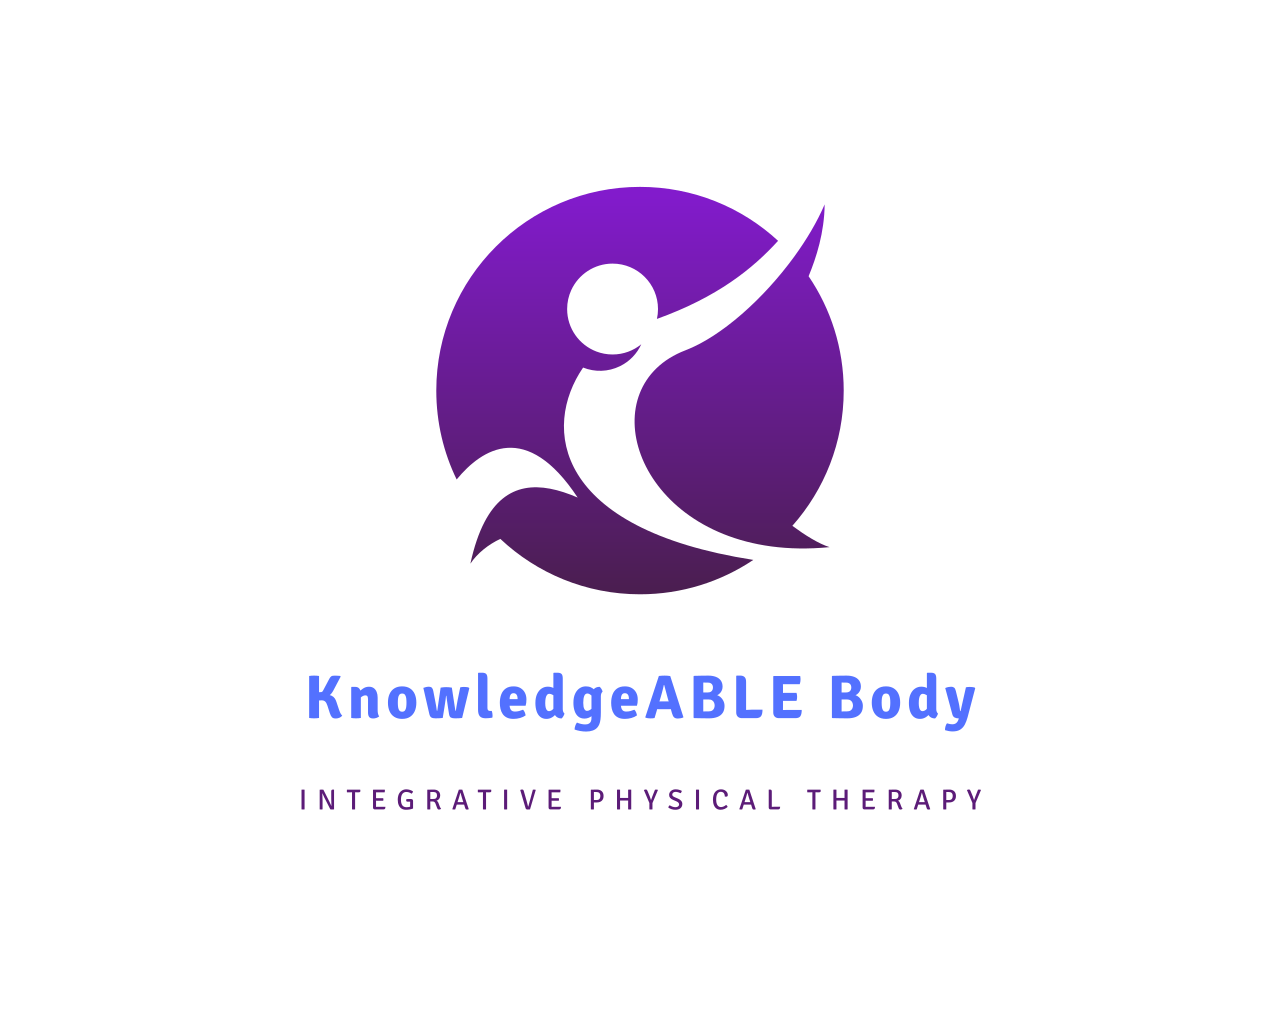 KnowledgeABLE Body Physical Therapy